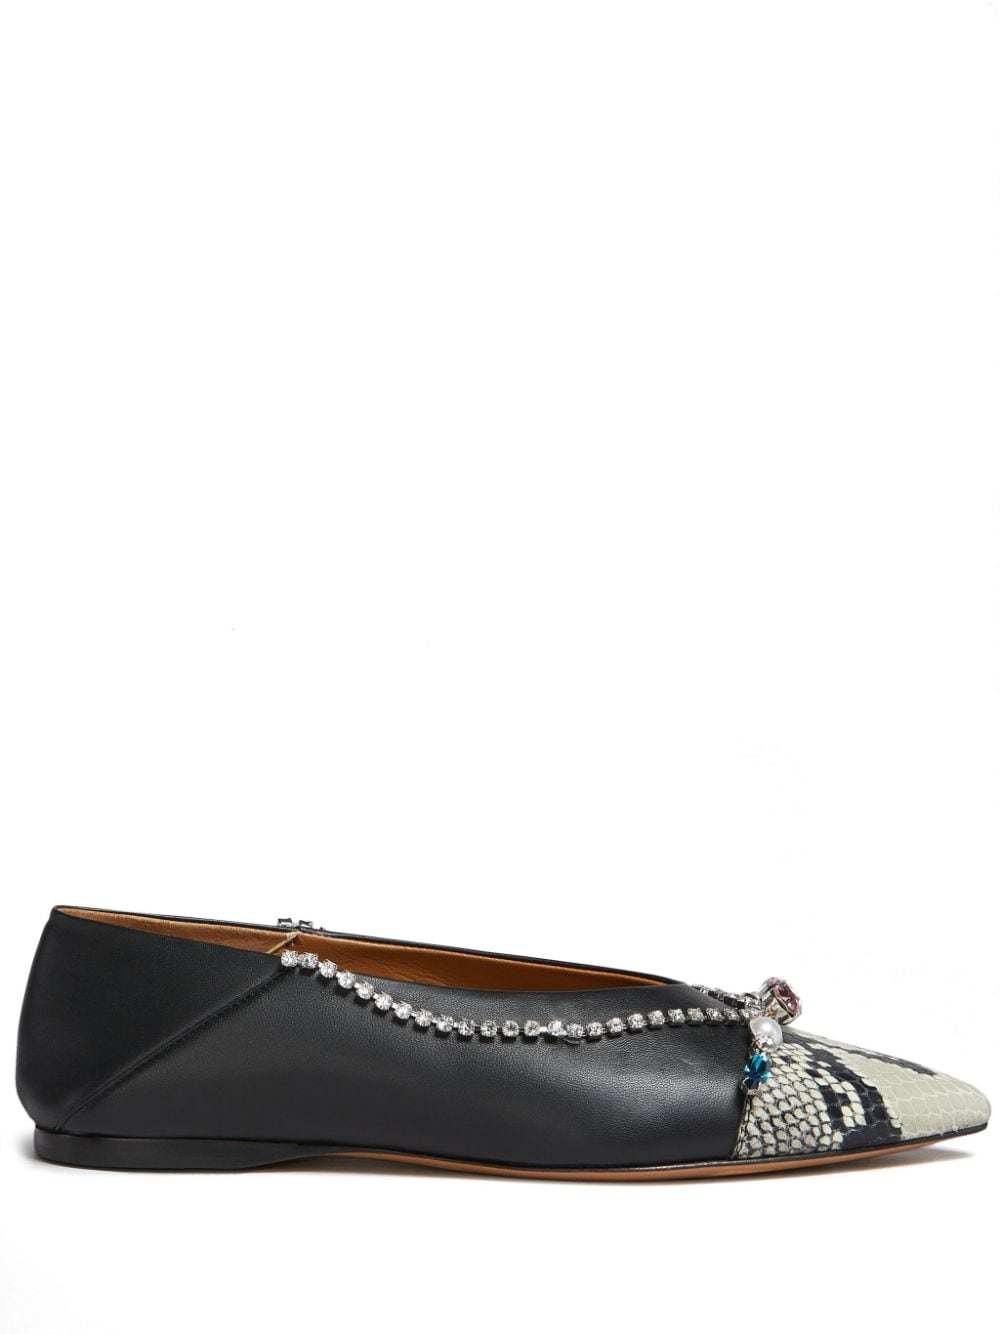 Marni Pointed-toe Flat Ballerina Shoes In Black